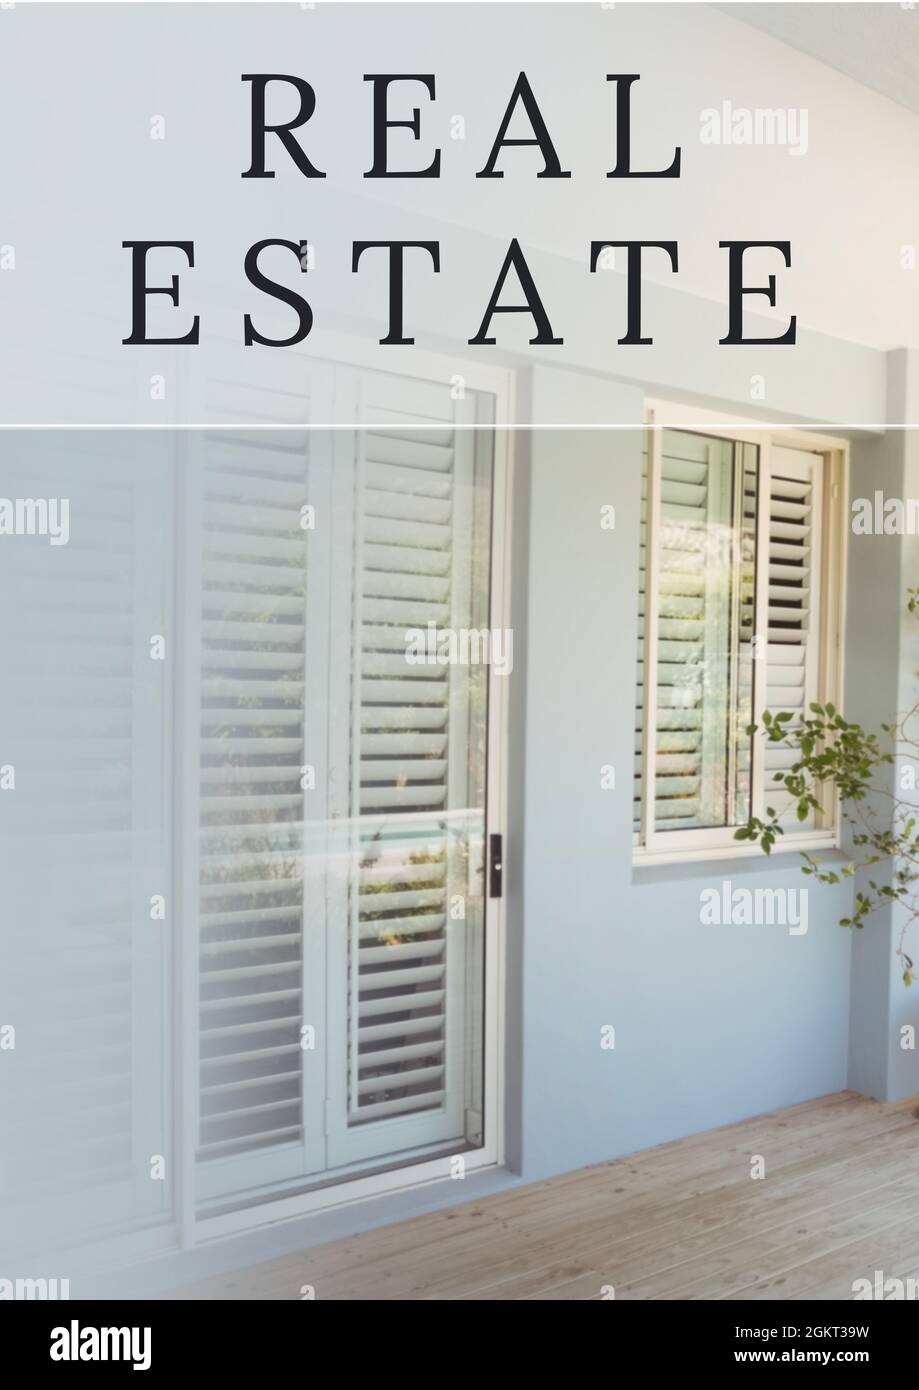 Real estate text over view of modern exterior design of house door and window Stock Photo